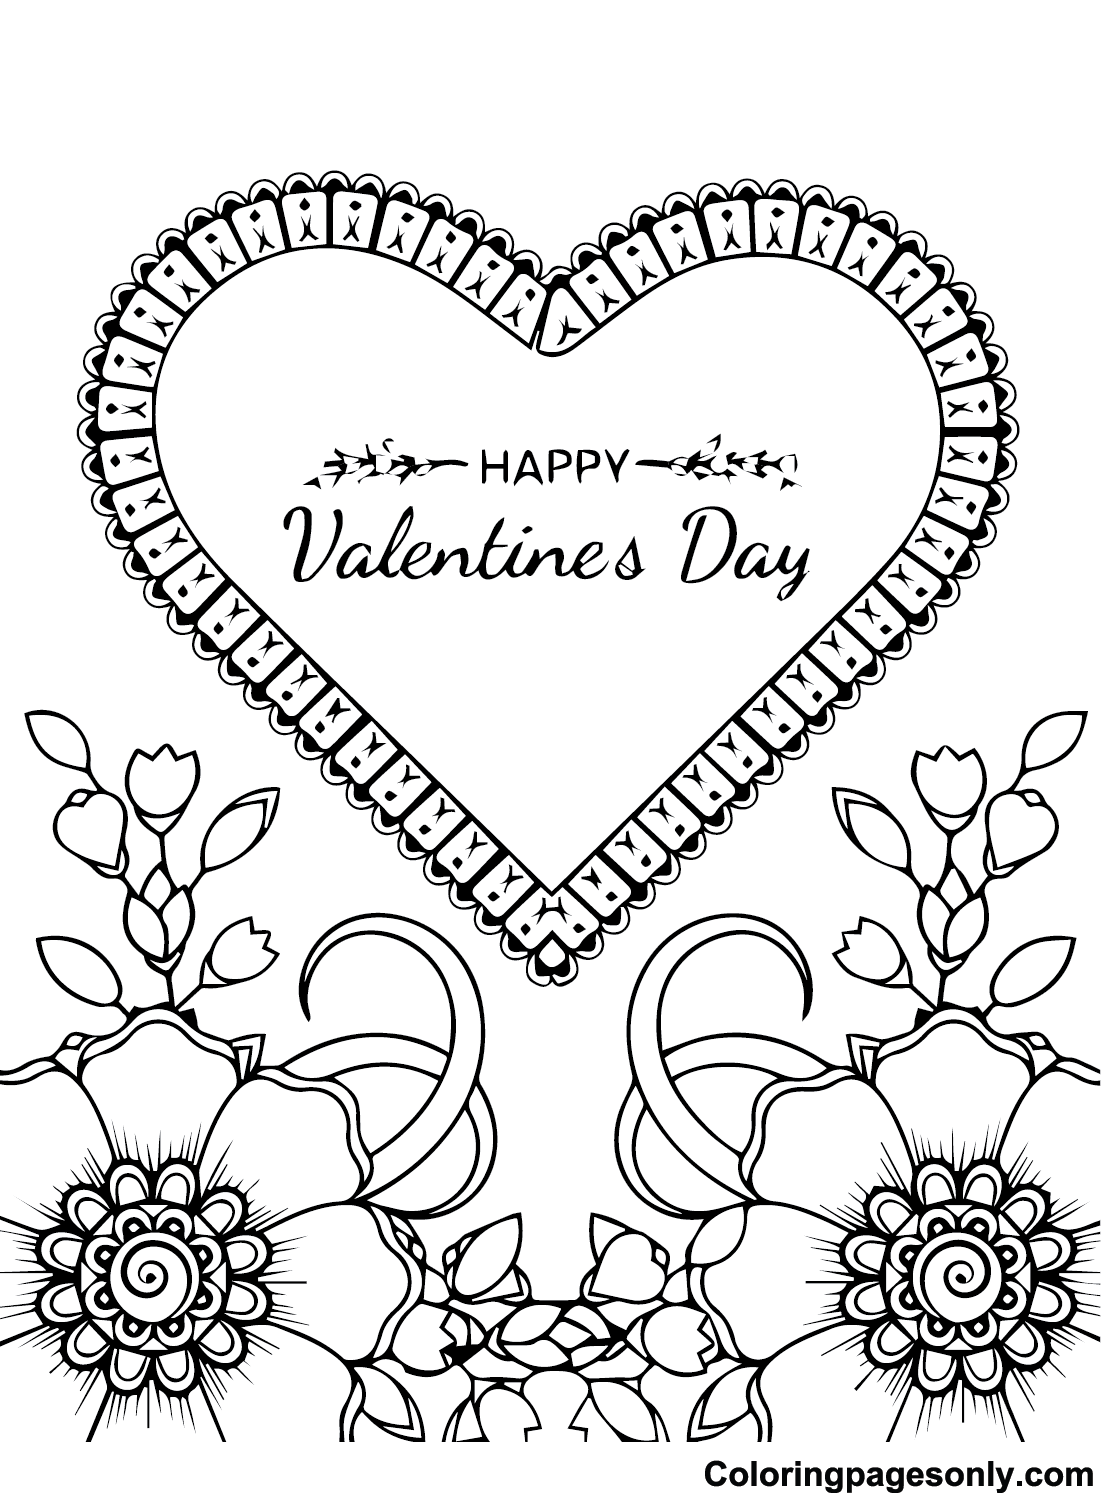 Pictures Valentines Day Cards Coloring Pages